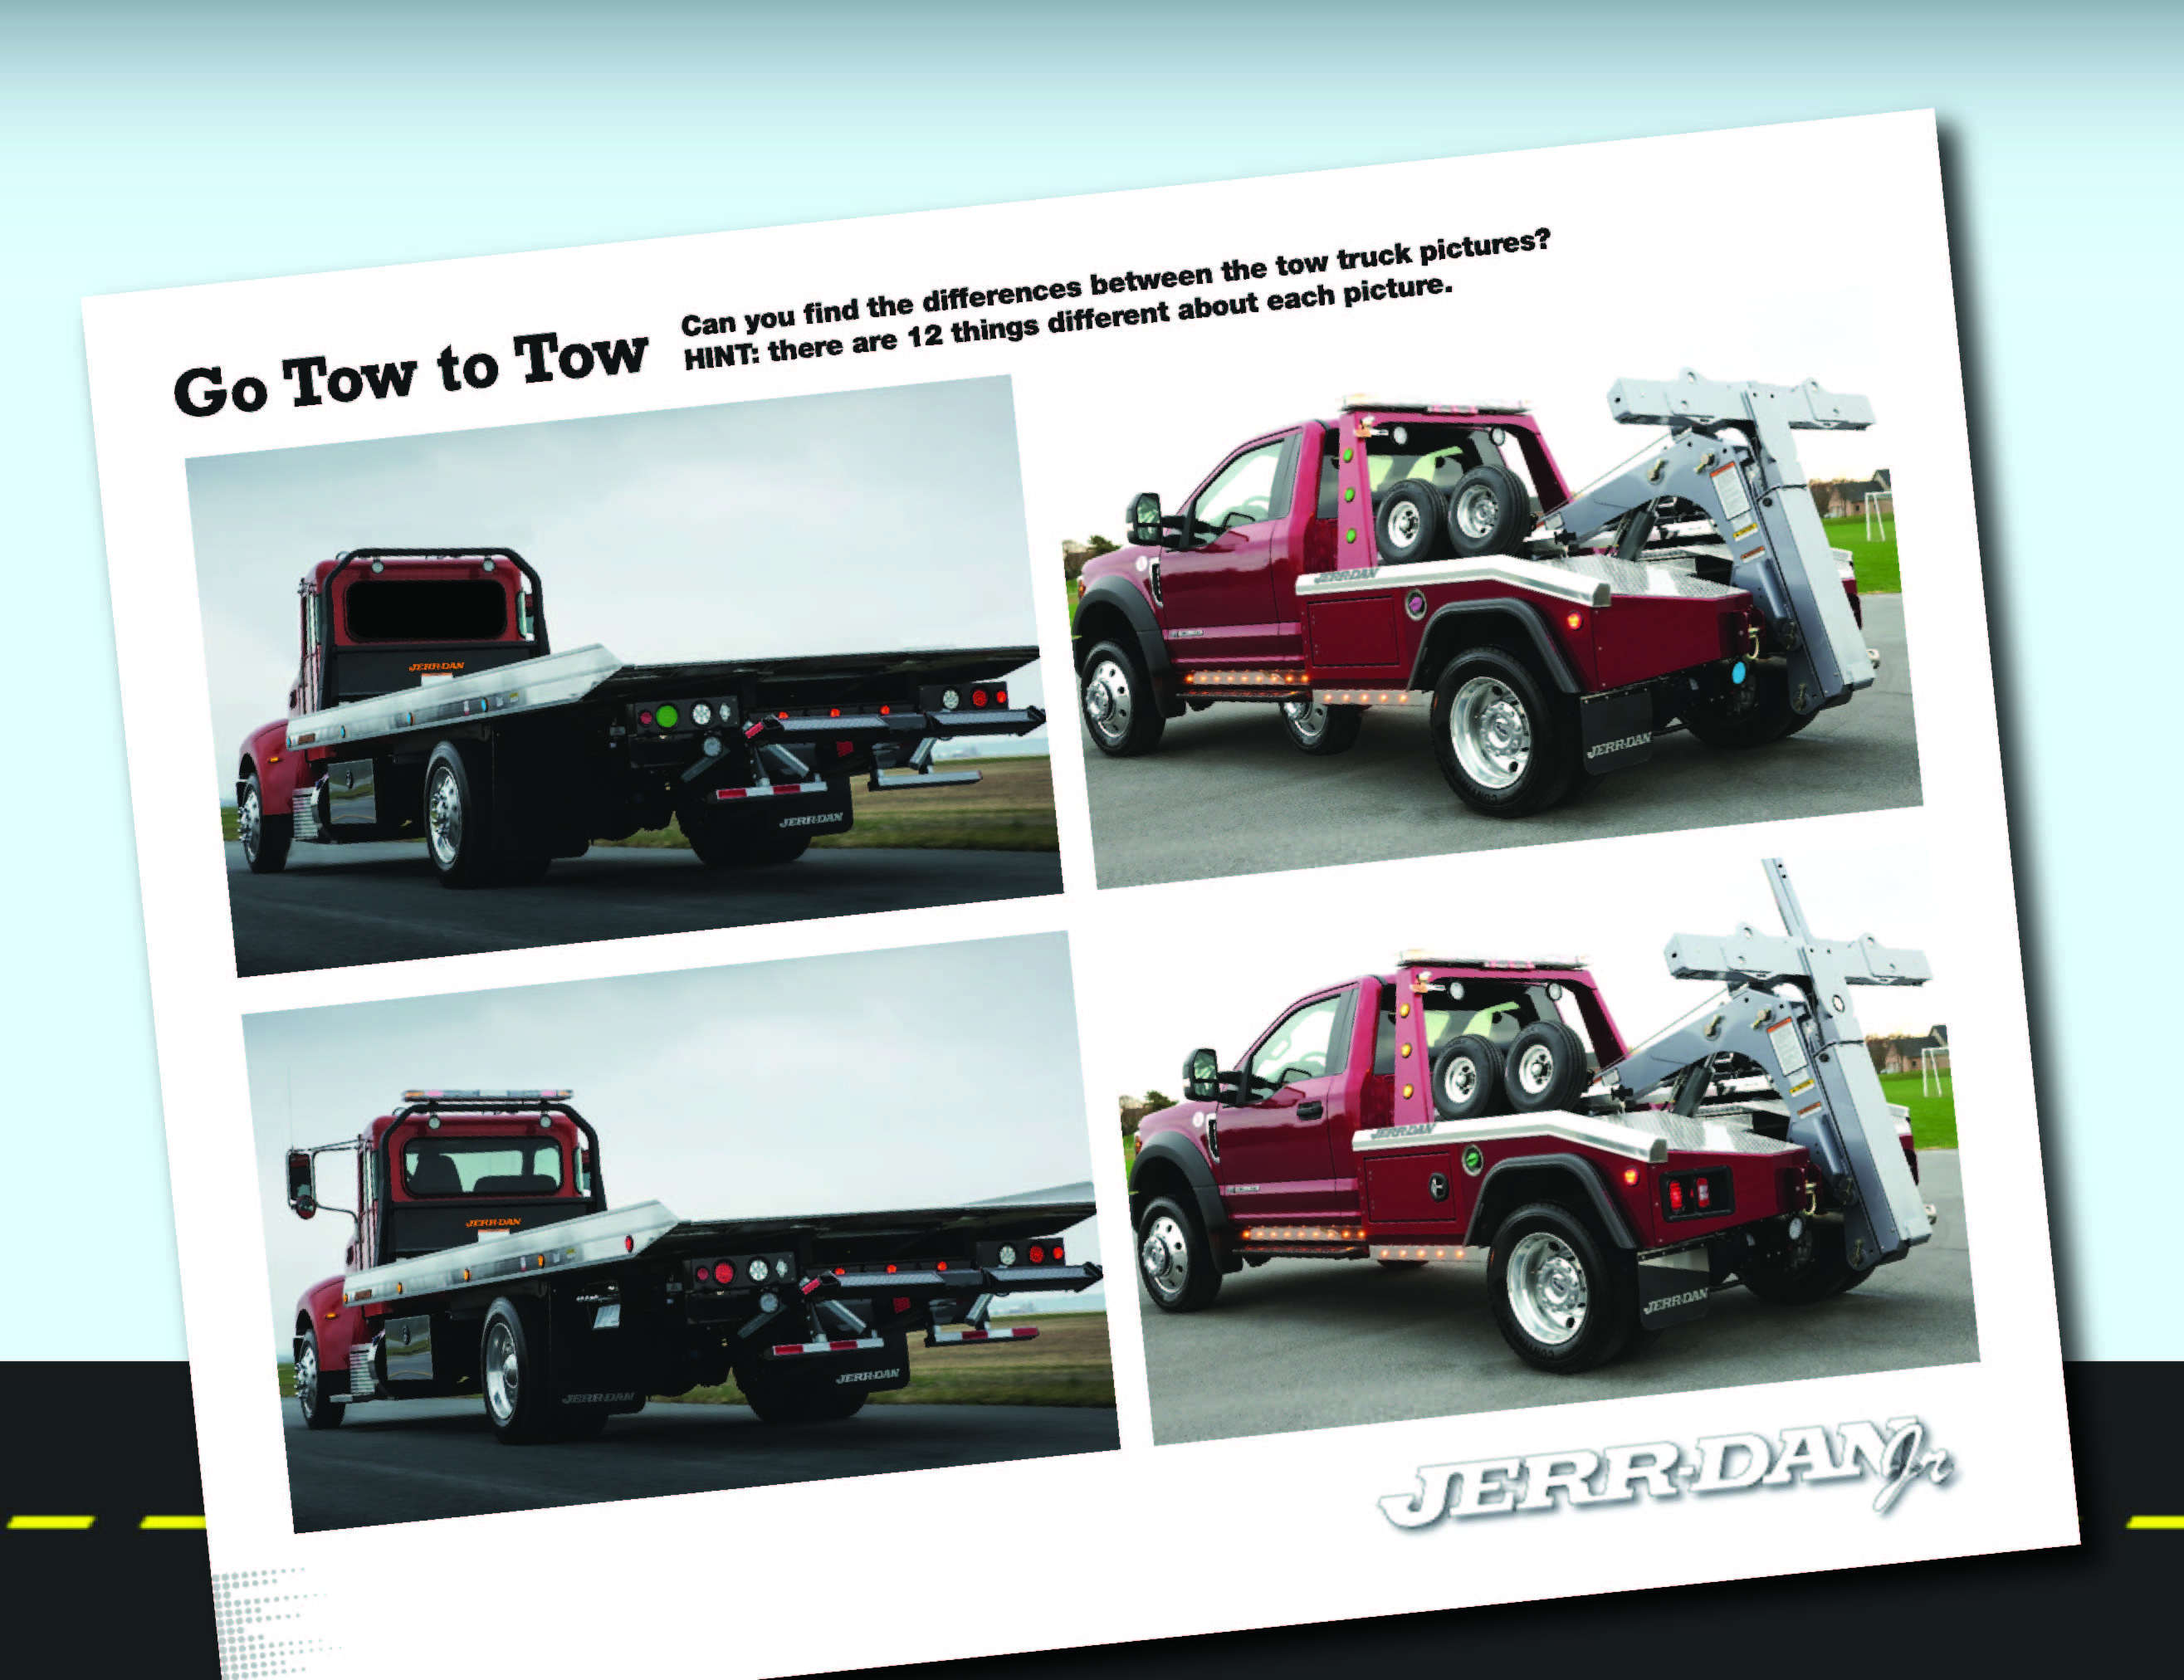 Go Tow to Tow